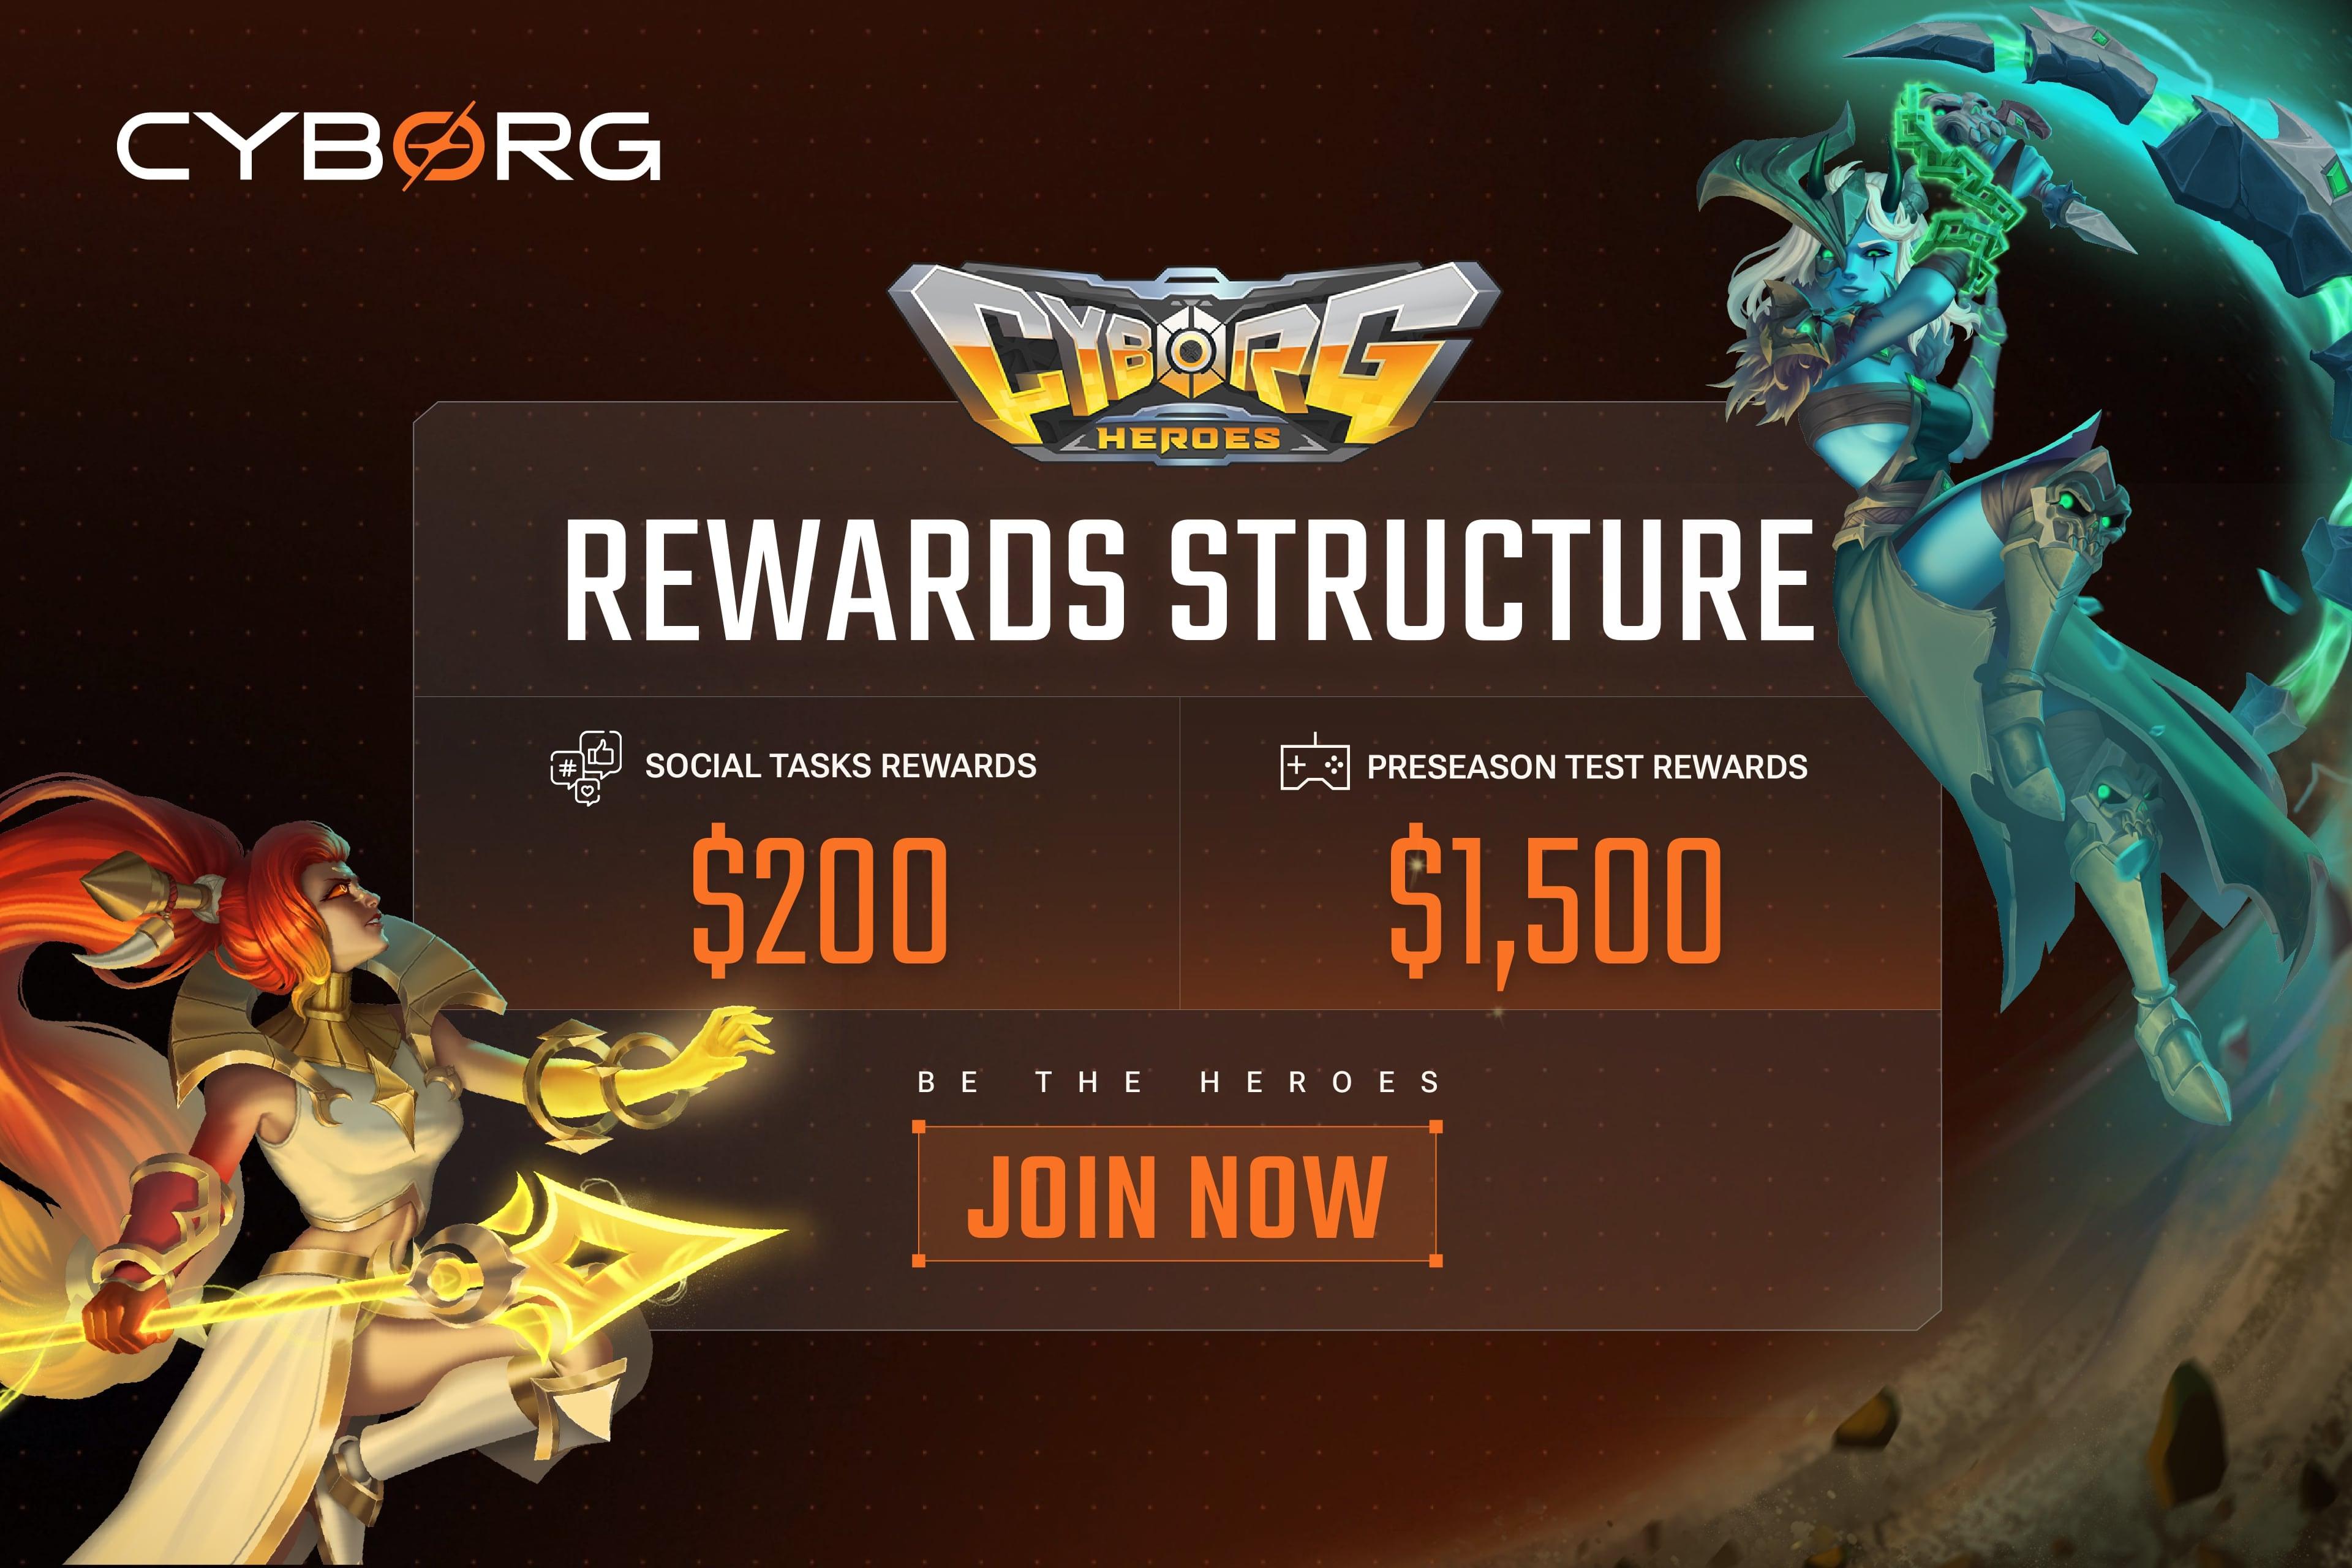 Join “Cyborg Heroes” Pre-Season Test Campaign And Earn $1,700 In Rewards